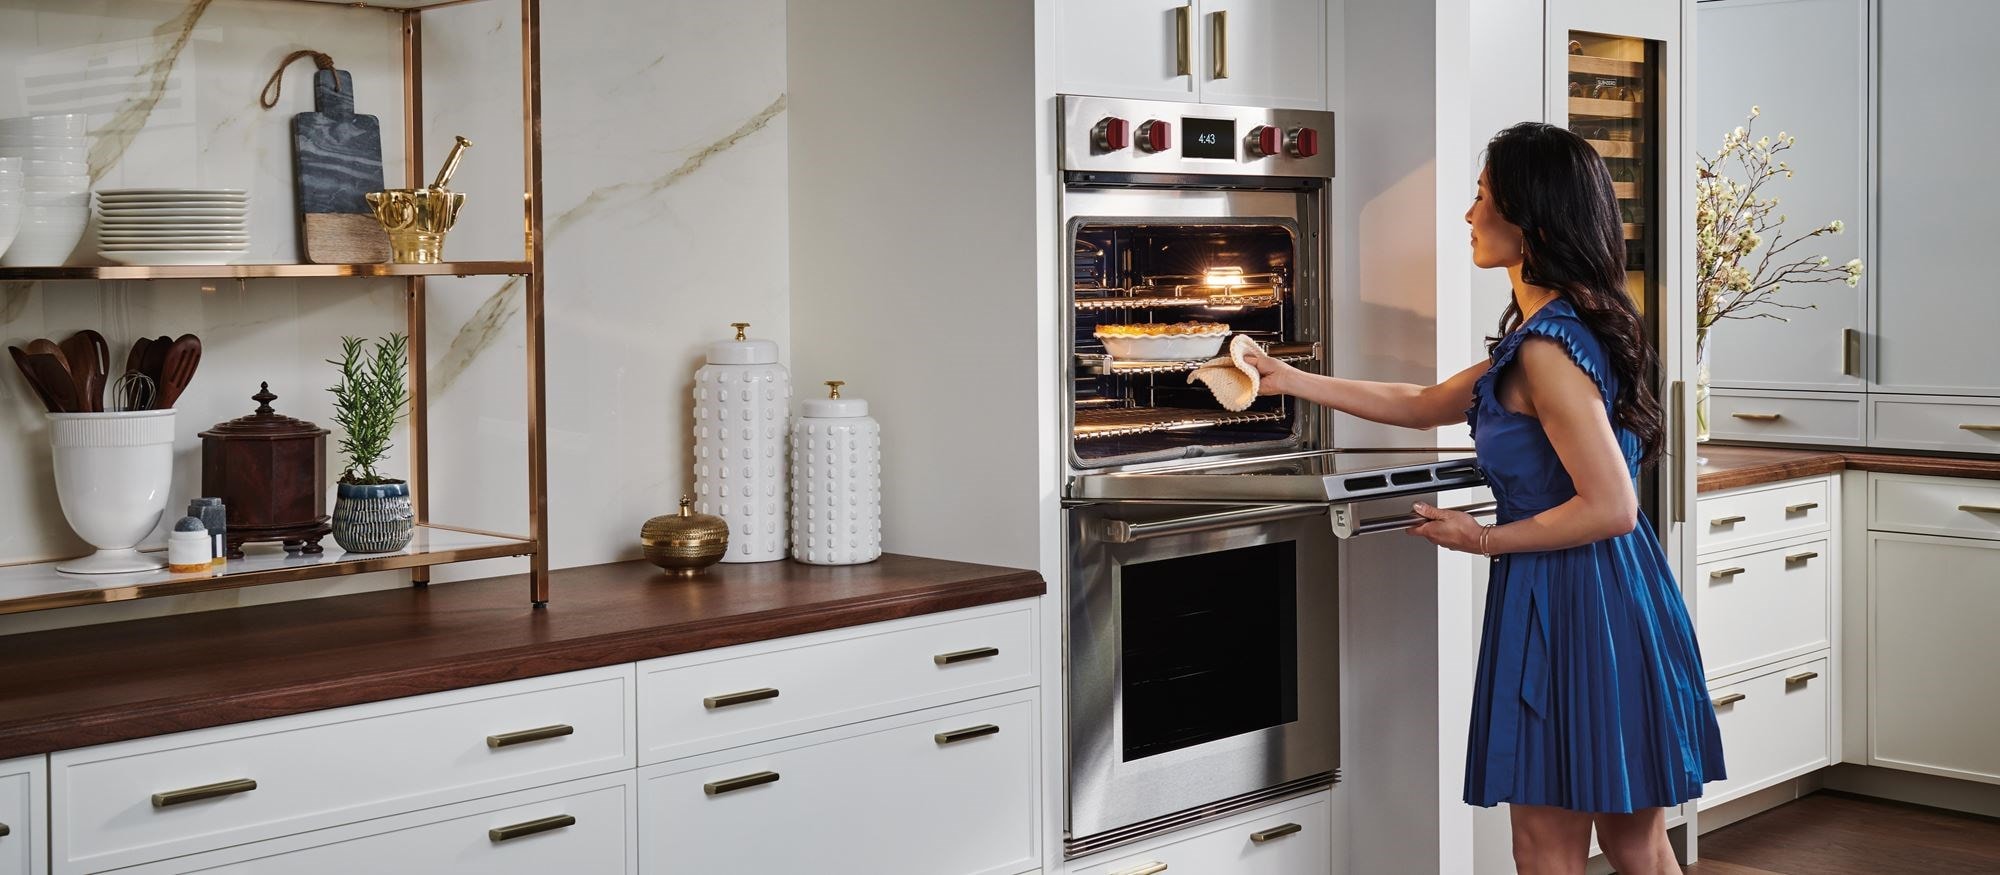 Wolf Built-In Ovens provide the ultimate luxury kitchen environment